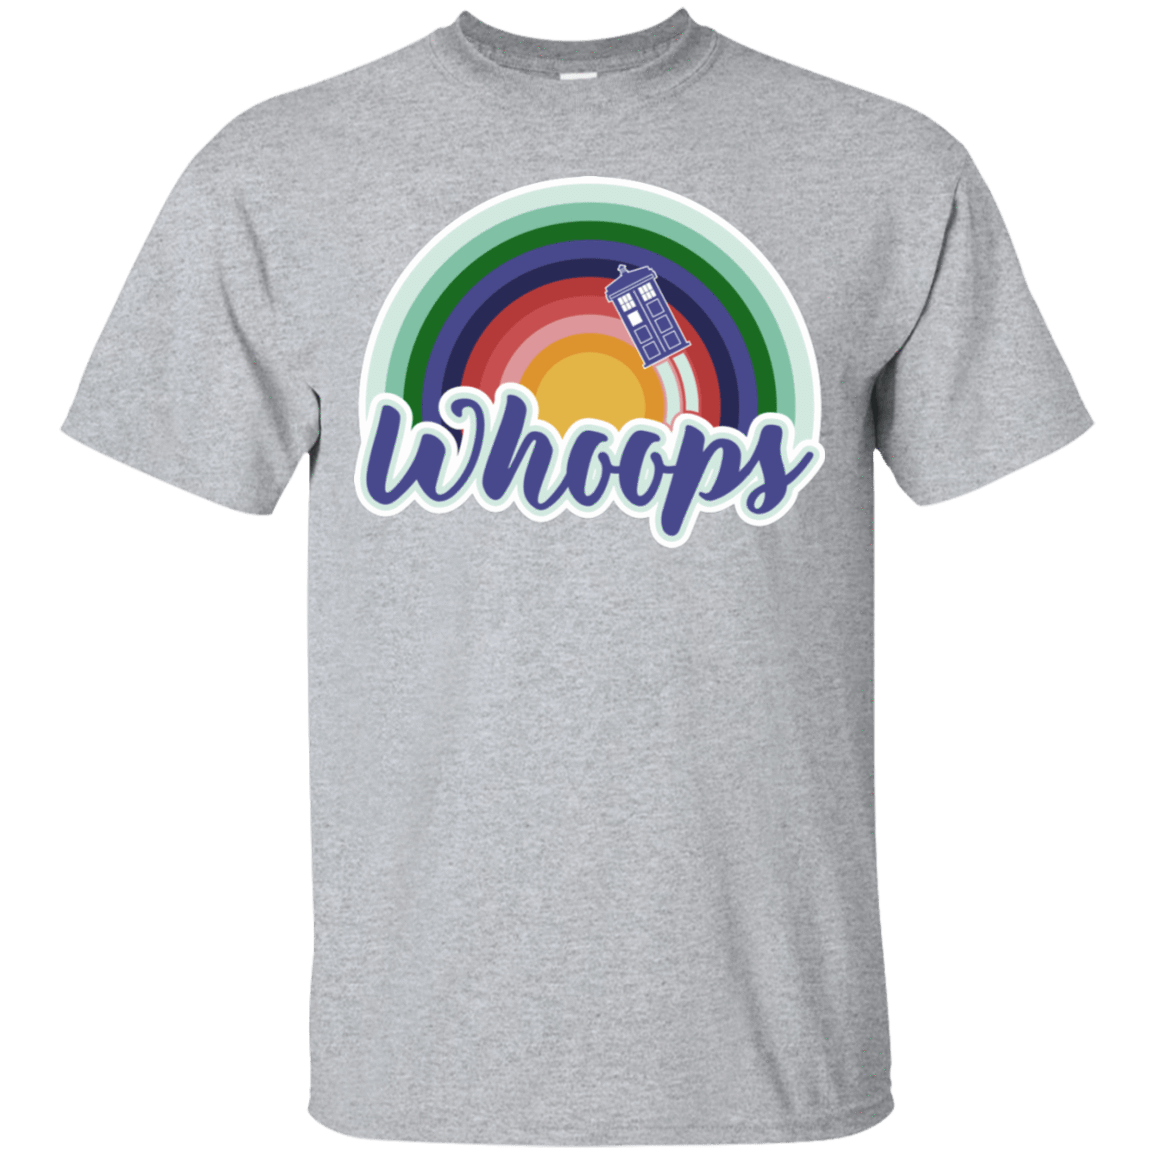 T-Shirts Sport Grey / S 13th Doctor Retro Whoops T-Shirt